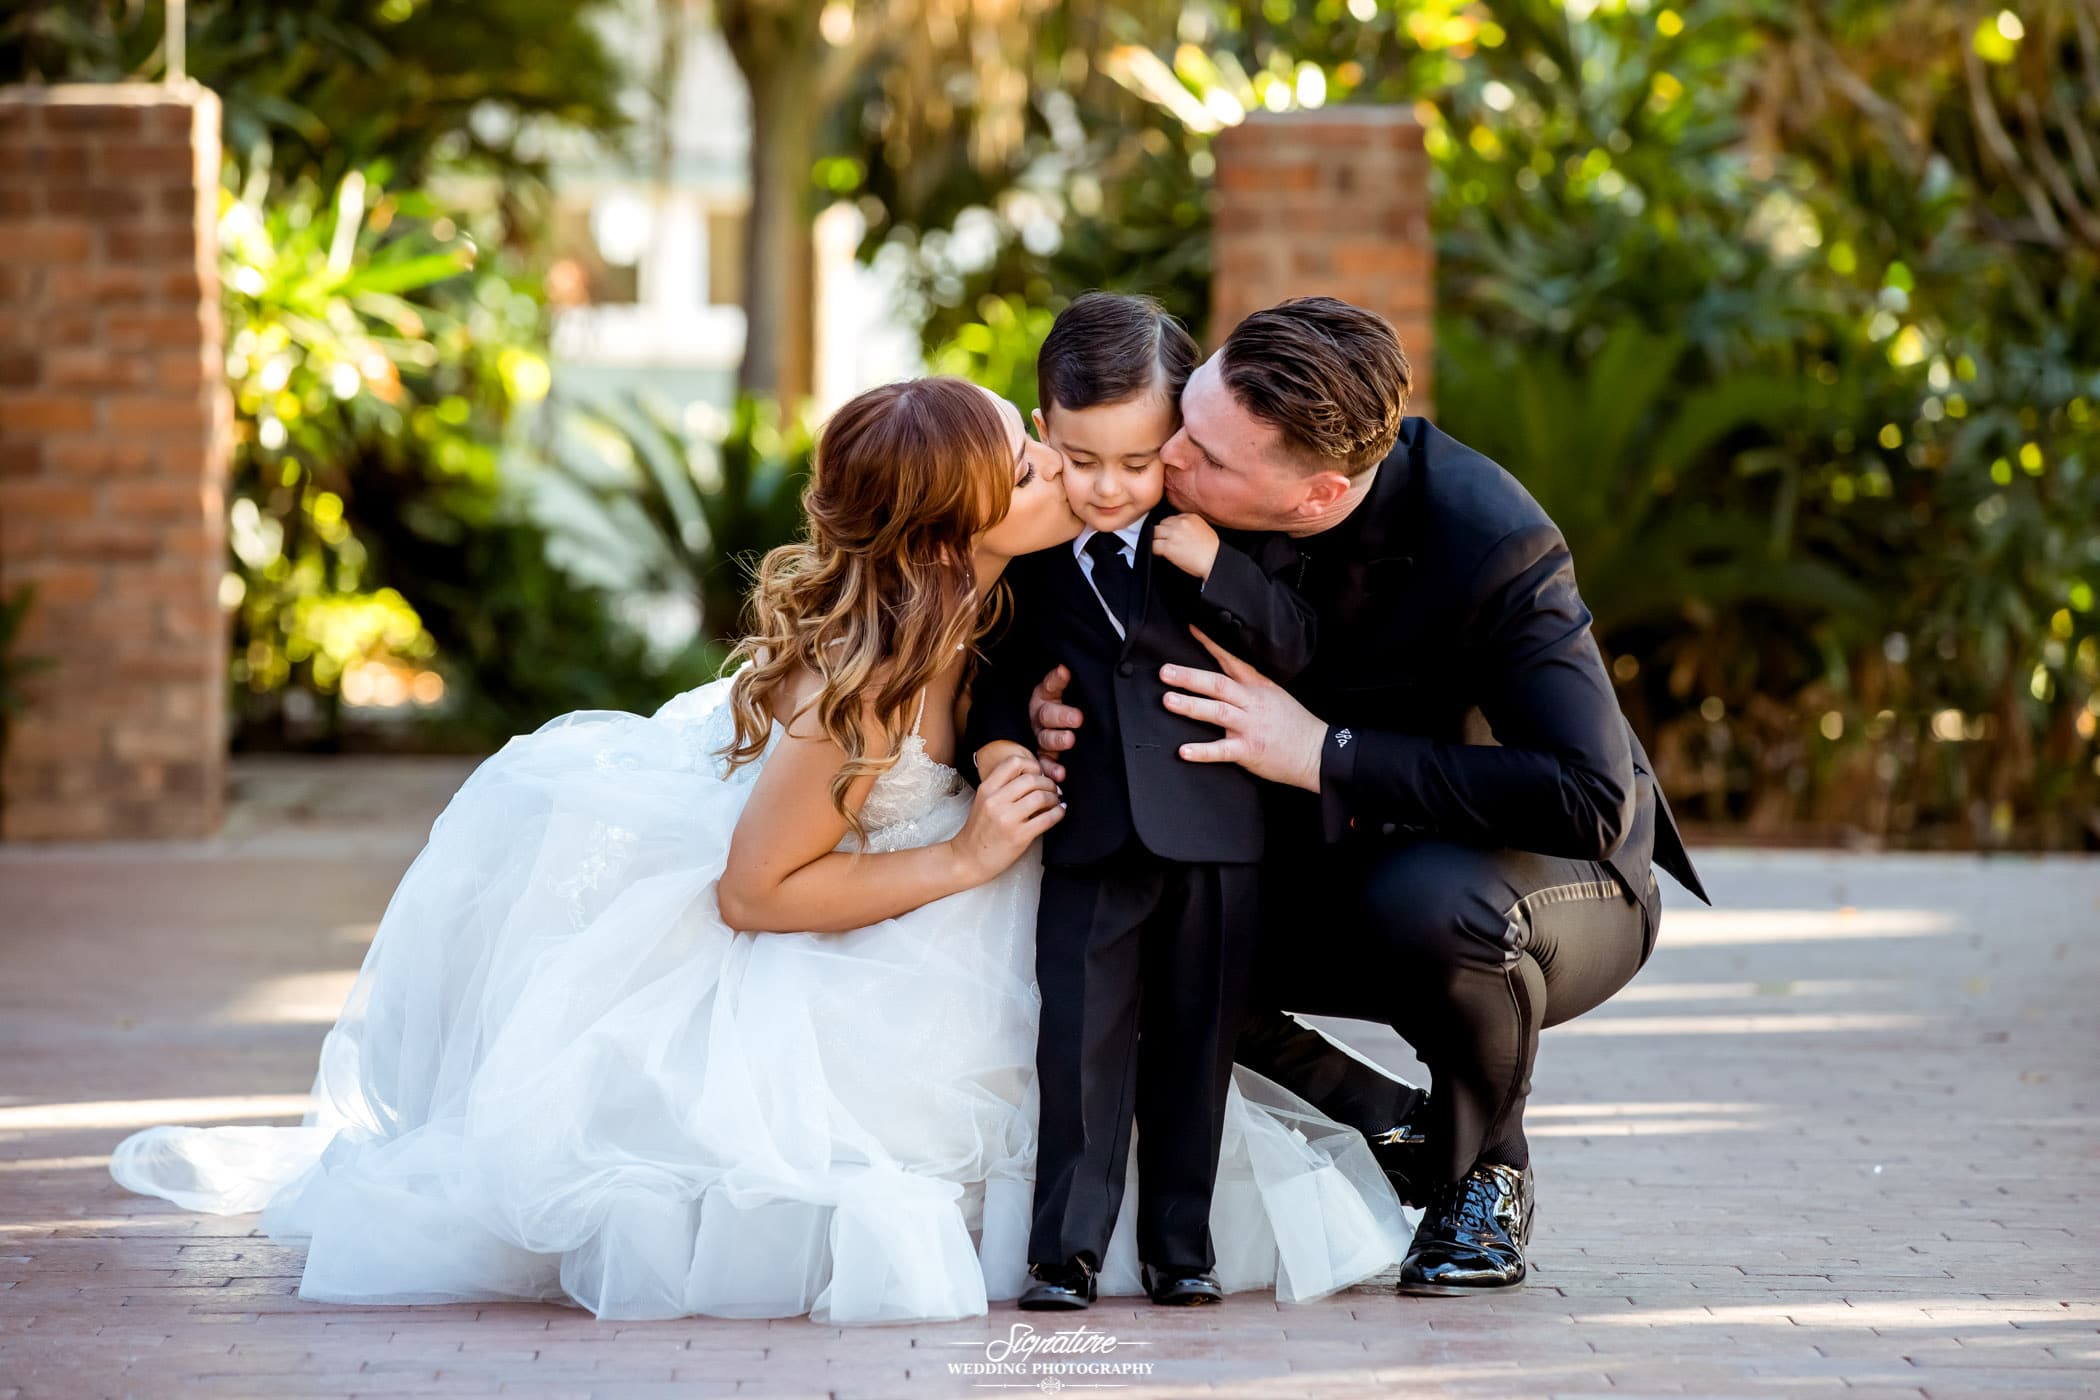 Bride and groom bent down kissing child on cheeks